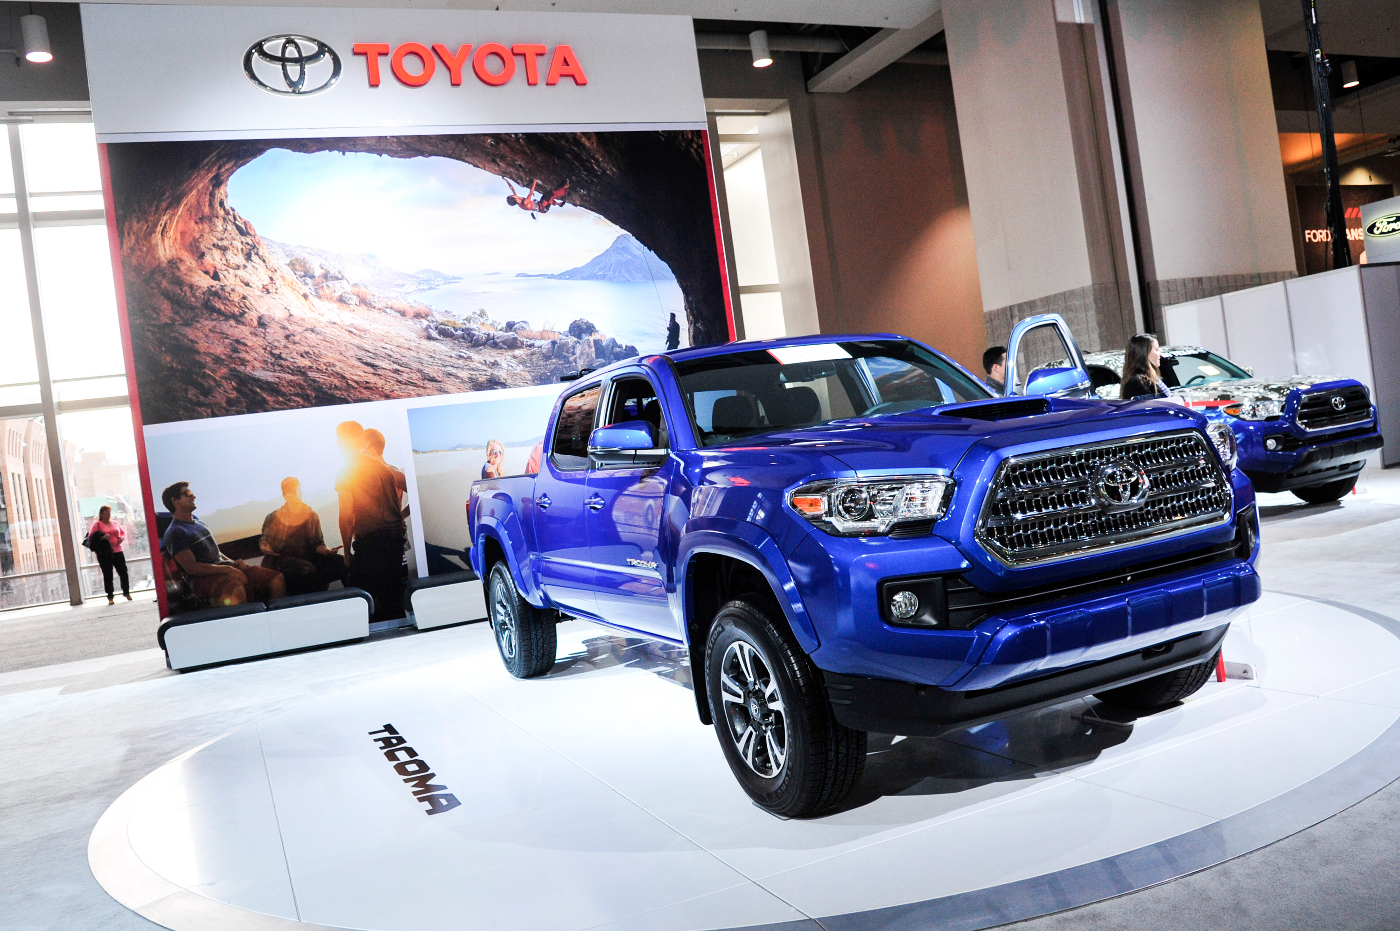 A Toyota mid-size truck, the Tacoma.